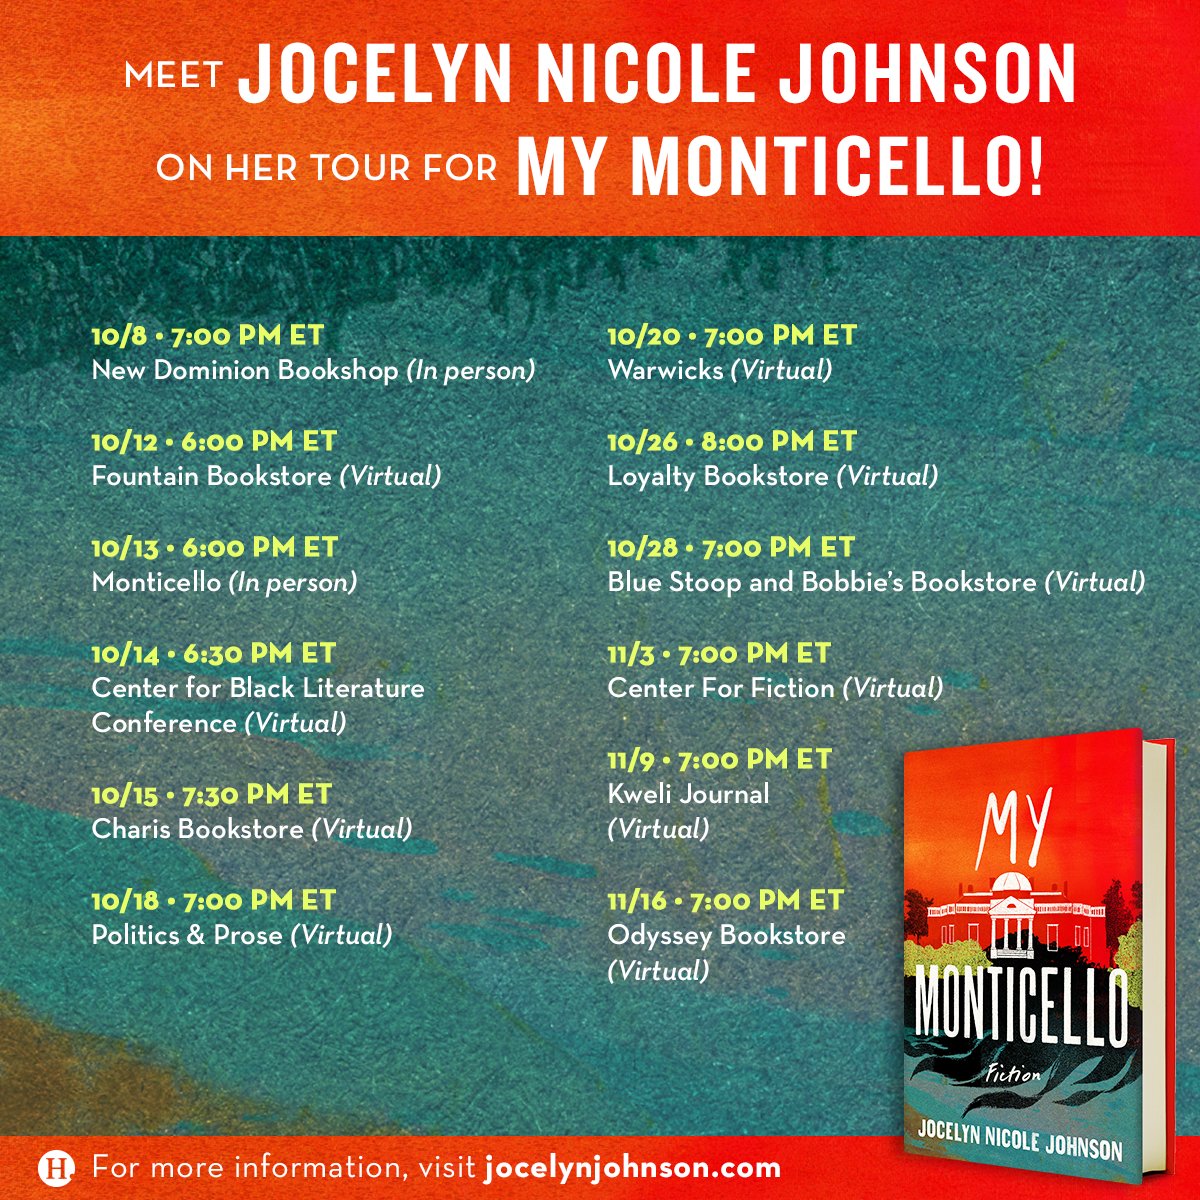 Don’t miss @jocelynjohnson in person at Charlottesville’s @NDBookshop discussing her new release, MY MONTICELLO! Happening tonight at 7pm ET! ow.ly/PTNS50GlEPa